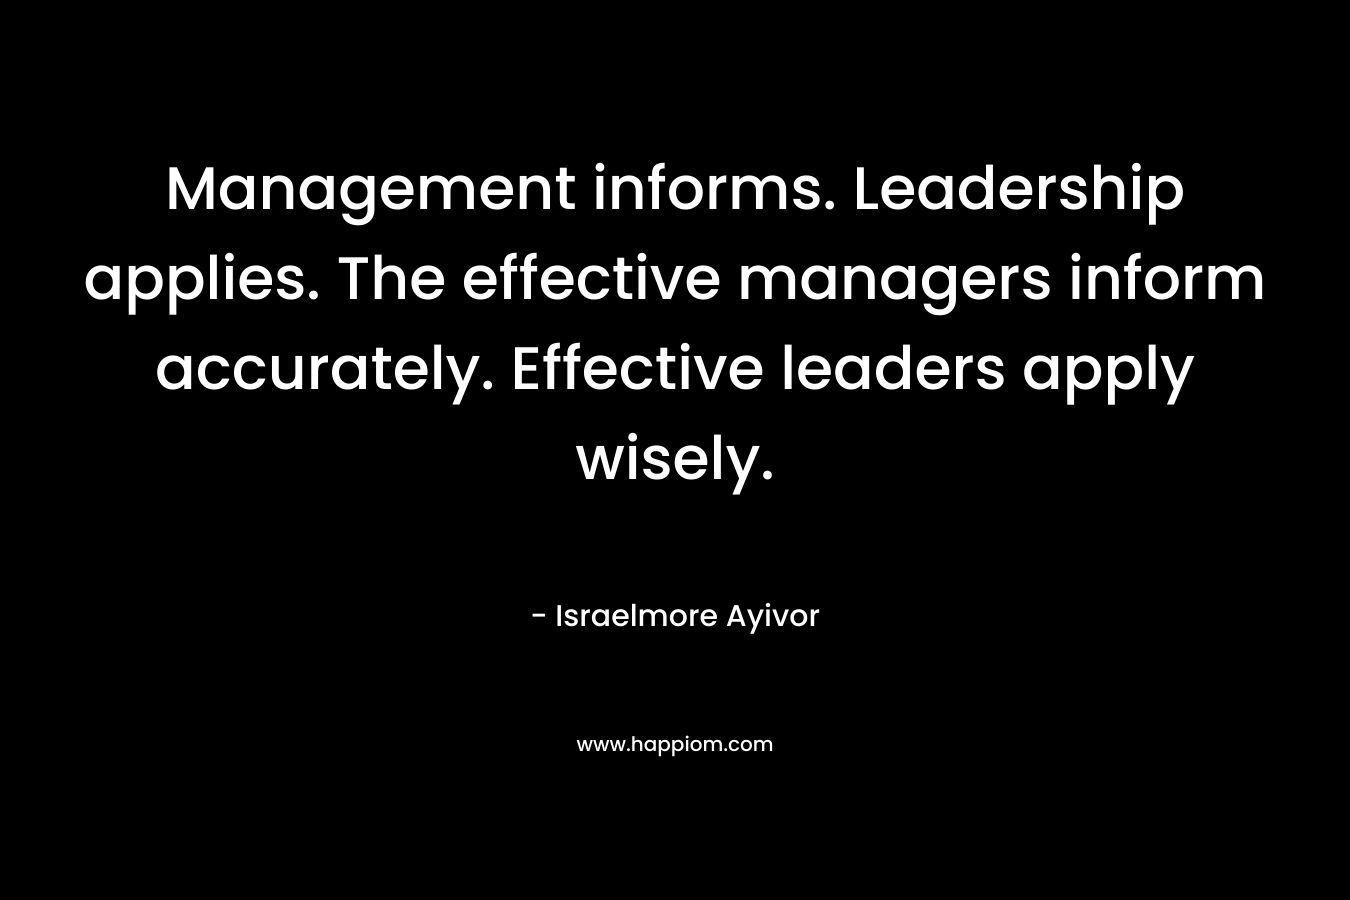 Management informs. Leadership applies. The effective managers inform accurately. Effective leaders apply wisely. – Israelmore Ayivor